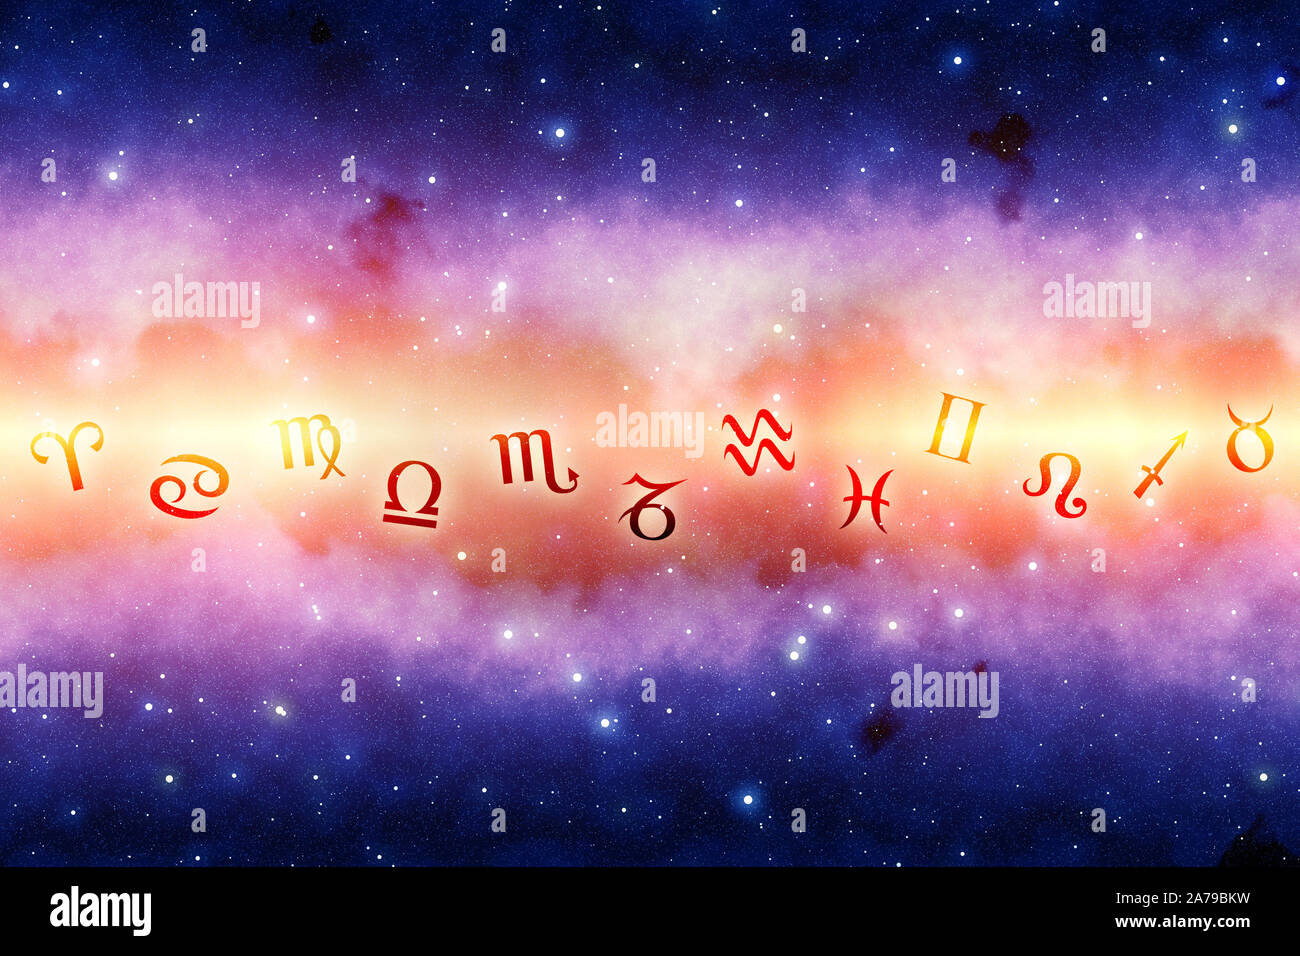 all the astrology signs of the zodiac on a background of stars Stock Photo